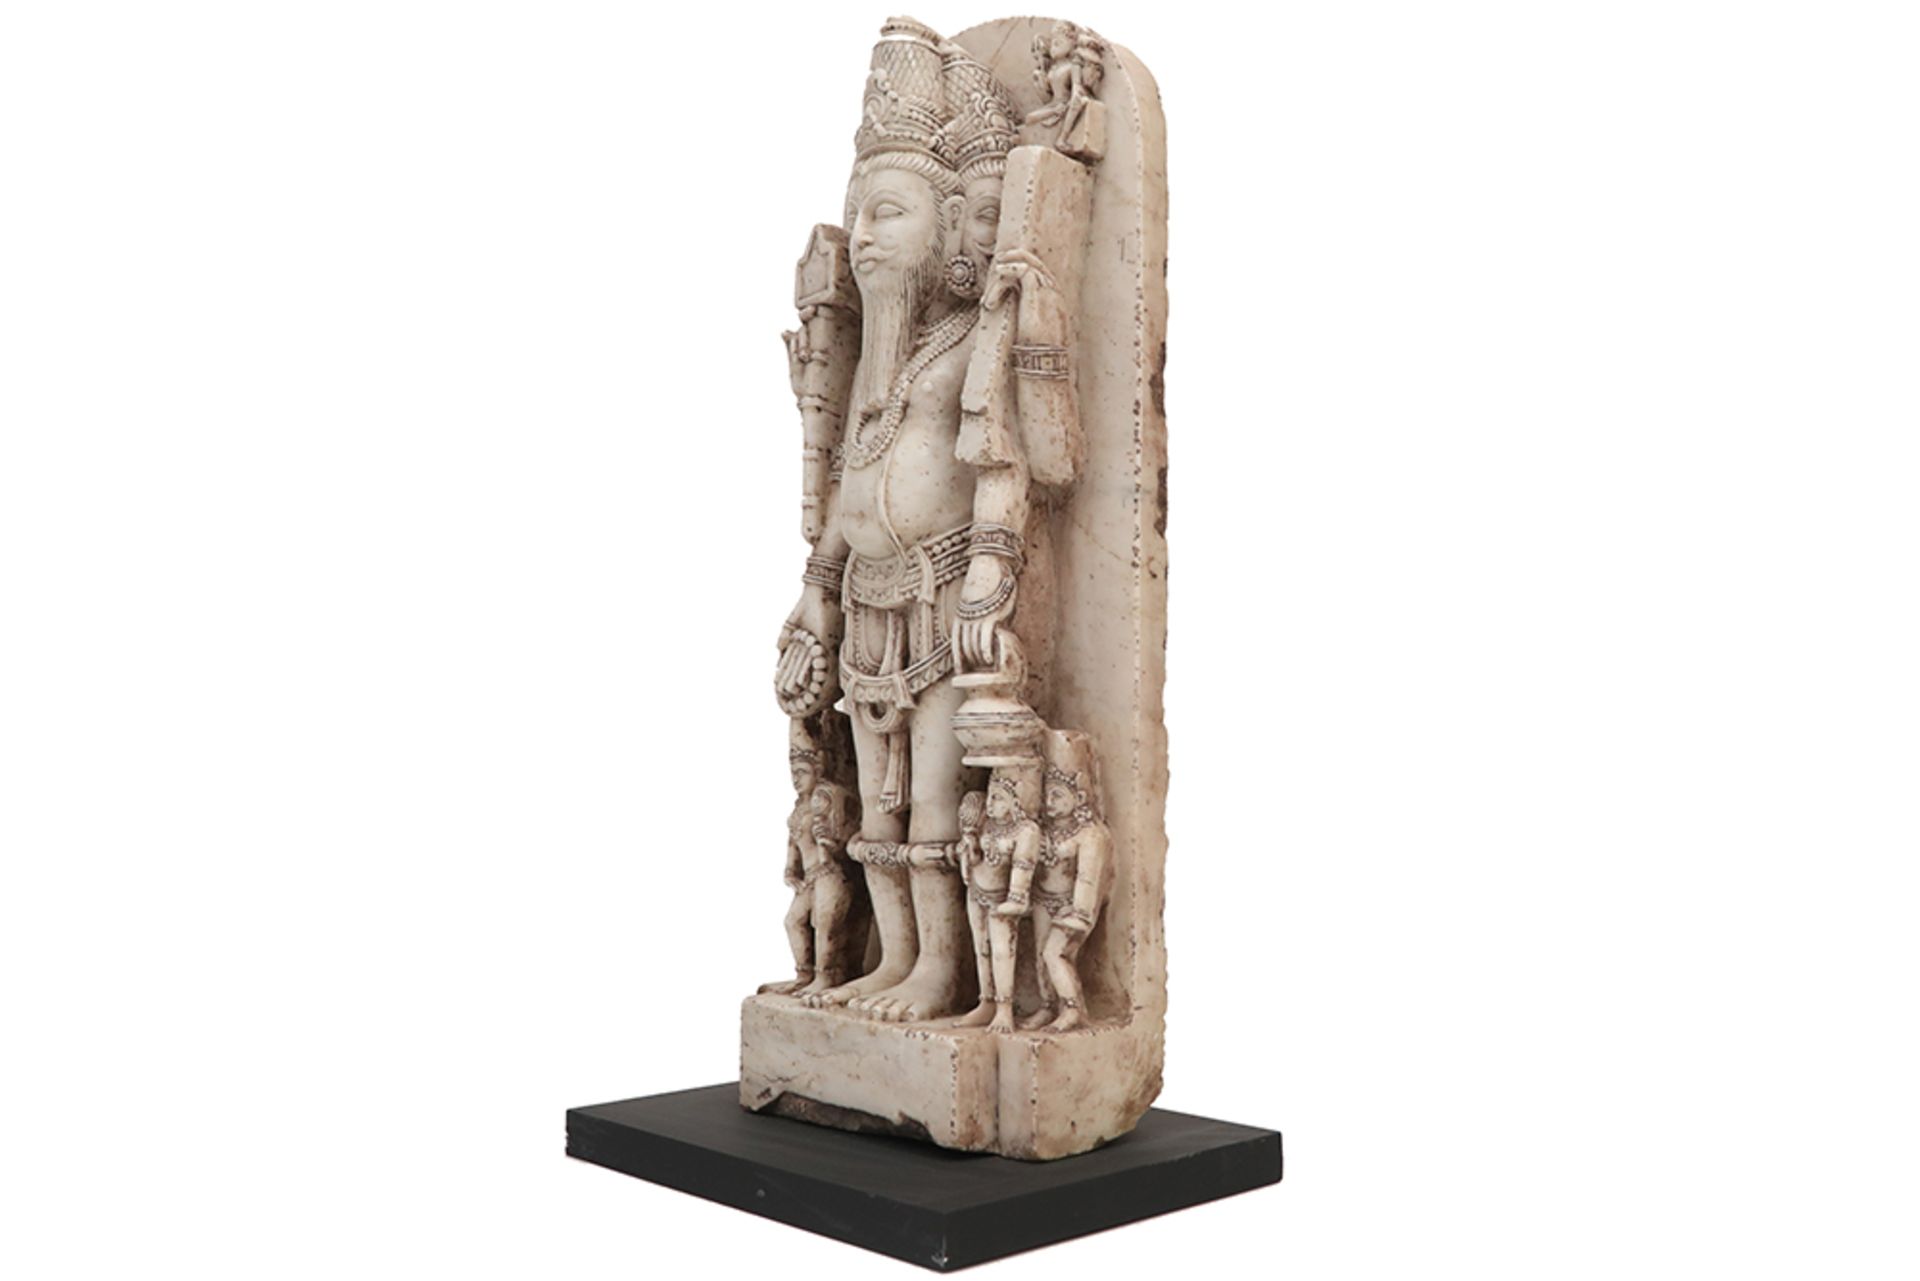 12th Cent. northern Indian three headed and four armed "Brahma Trimuti" sculpture in marble || - Image 3 of 4